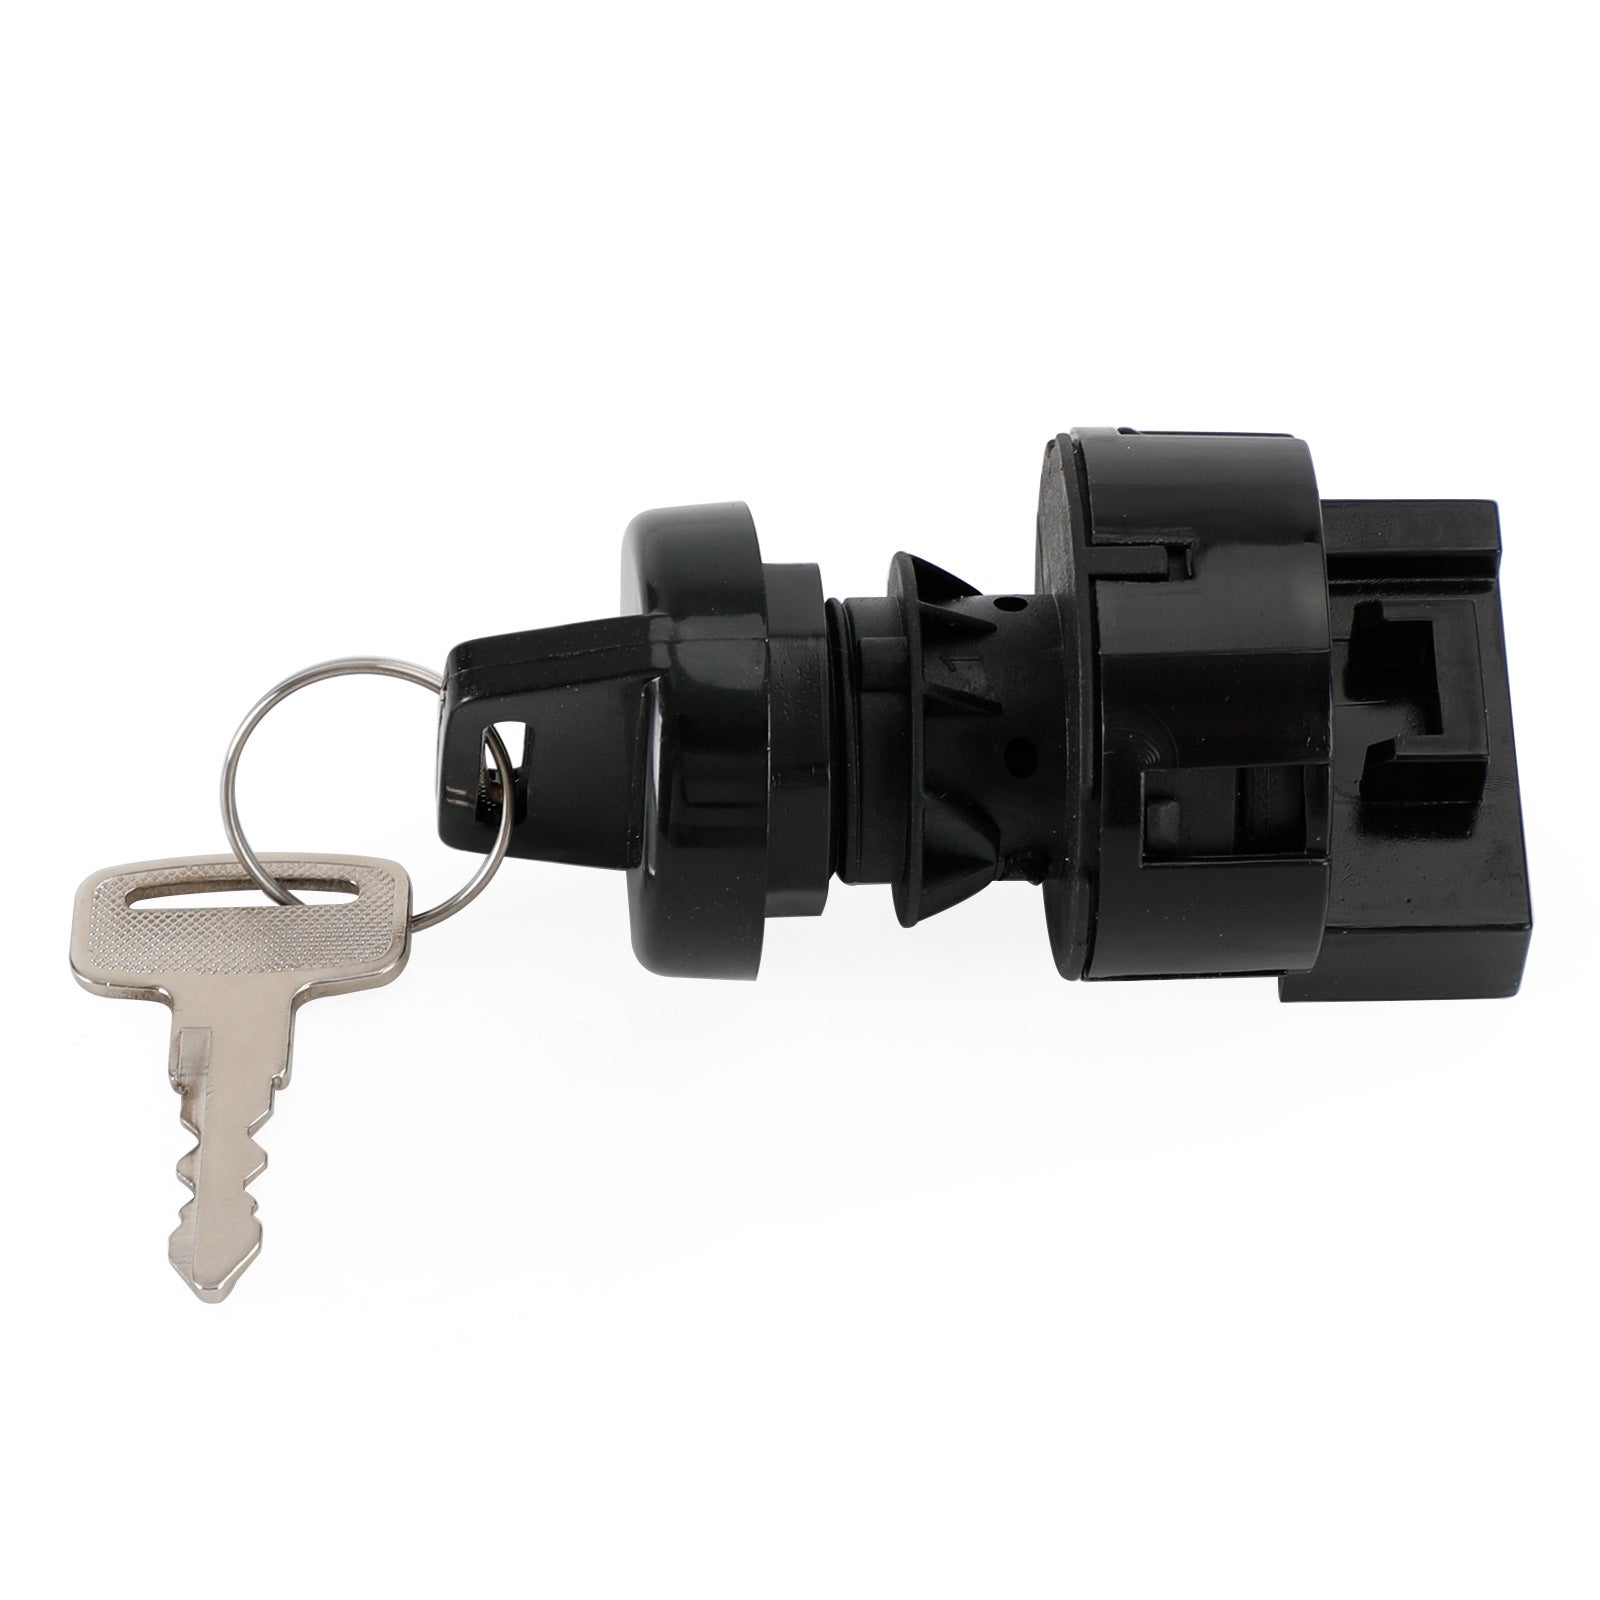 4 Position Ignition Key Switch 4016058 For Polaris Ranger RZR XP 1000 EPS 17-21 Generic